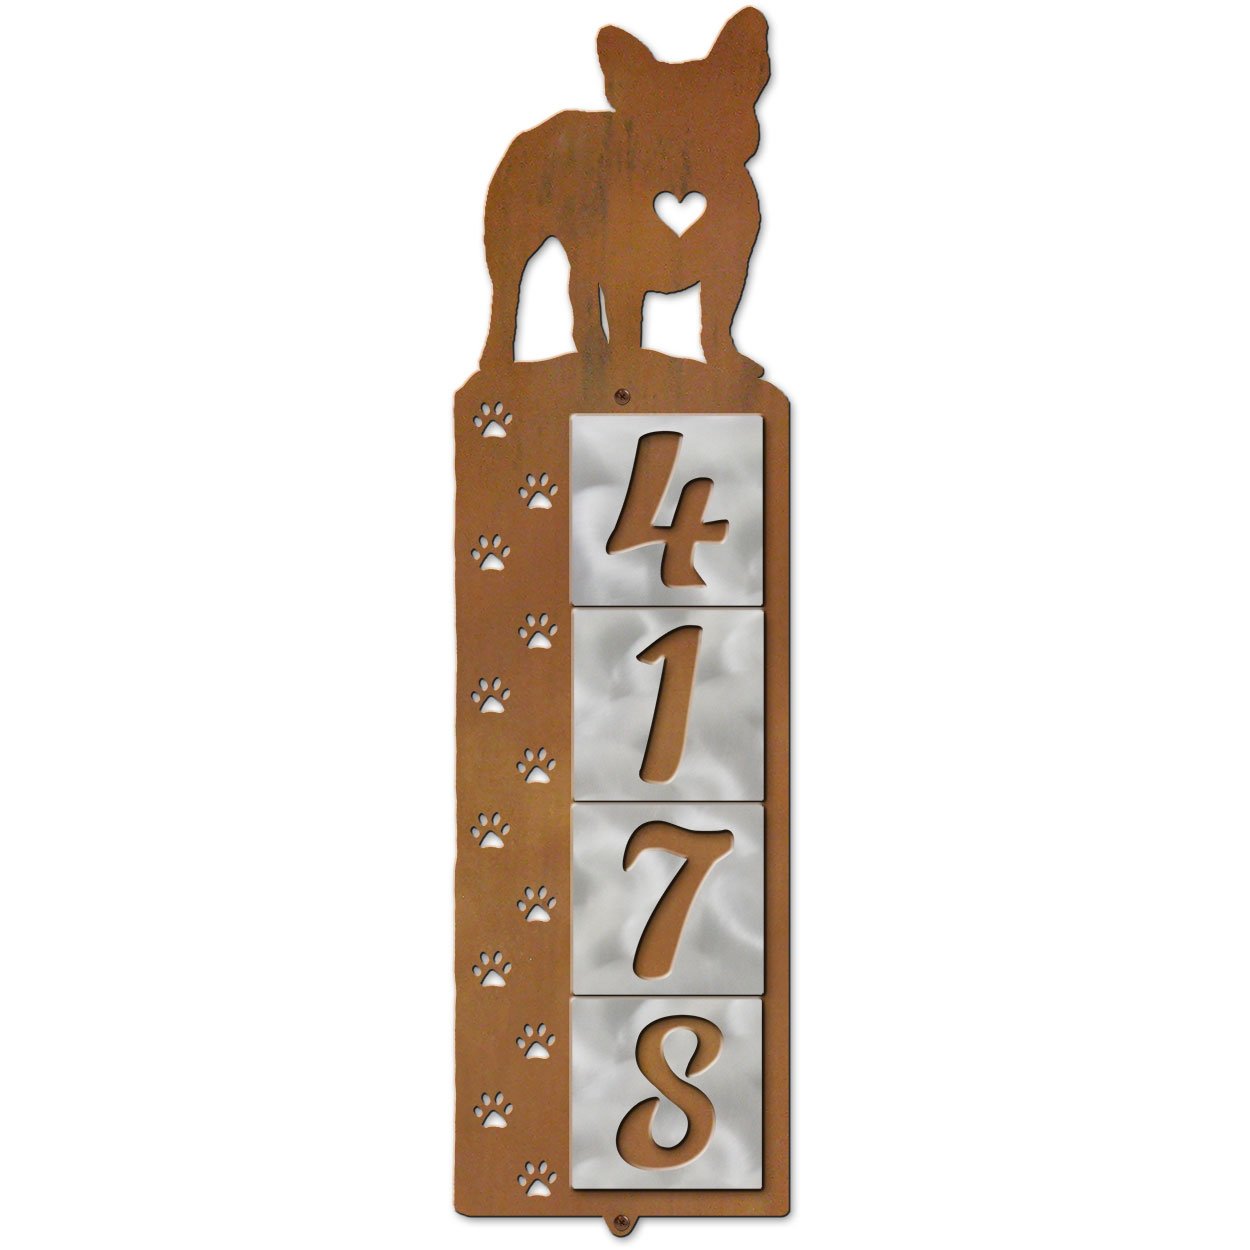 606214 - French Bulldog Dog Tracks 4-Digit Vertical House Numbers